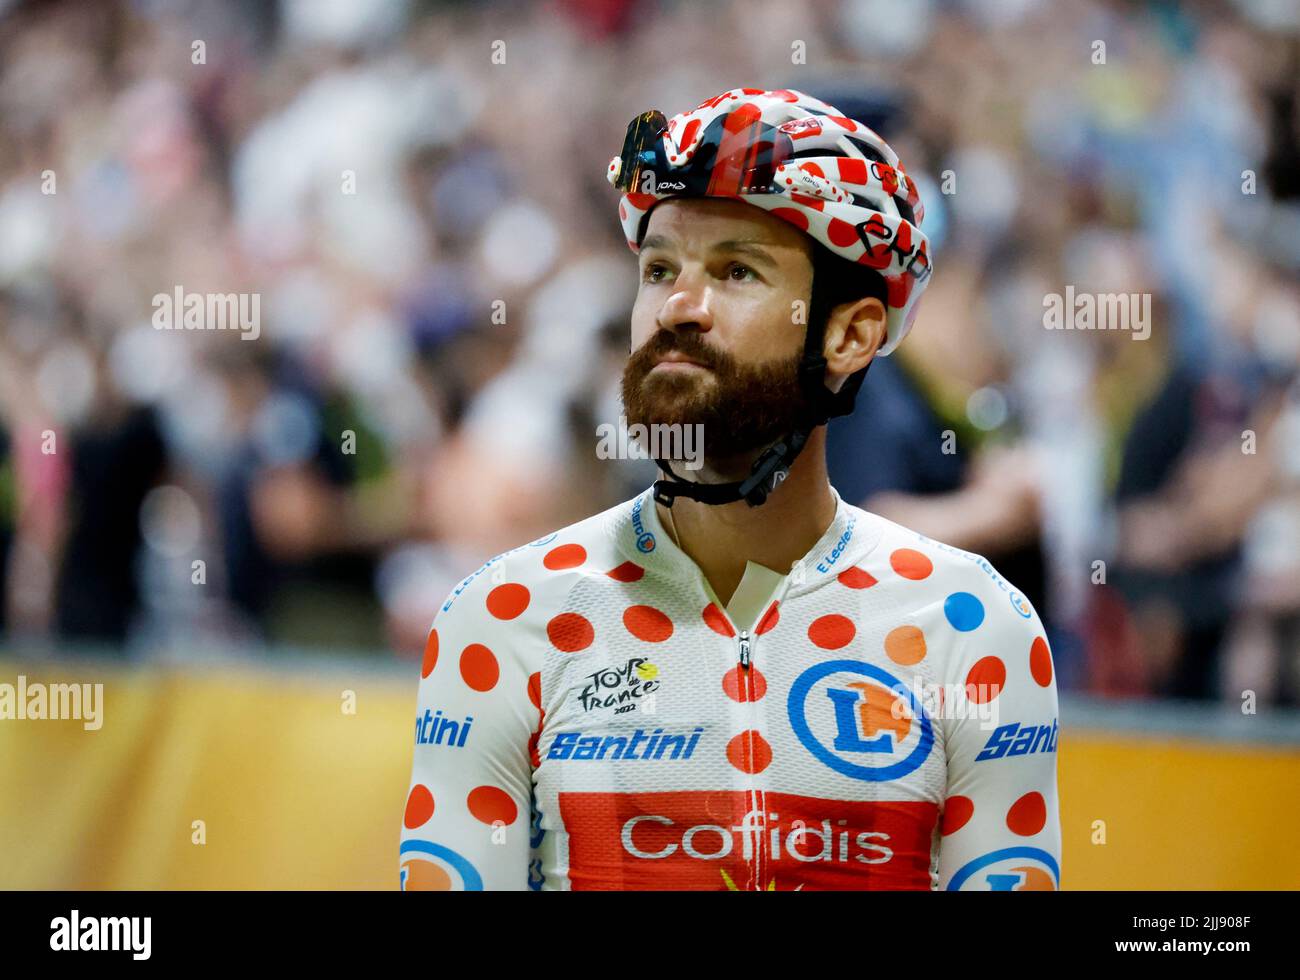 Cycling - Tour de France - Stage 21 - Paris La Defense Arena to Champs-Elysees - France - July 24, 2022 Cofidis' Simon Geschke wearing the polka-dot jersey before the start of stage 21 REUTERS/Gonzalo Fuentes Stock Photo